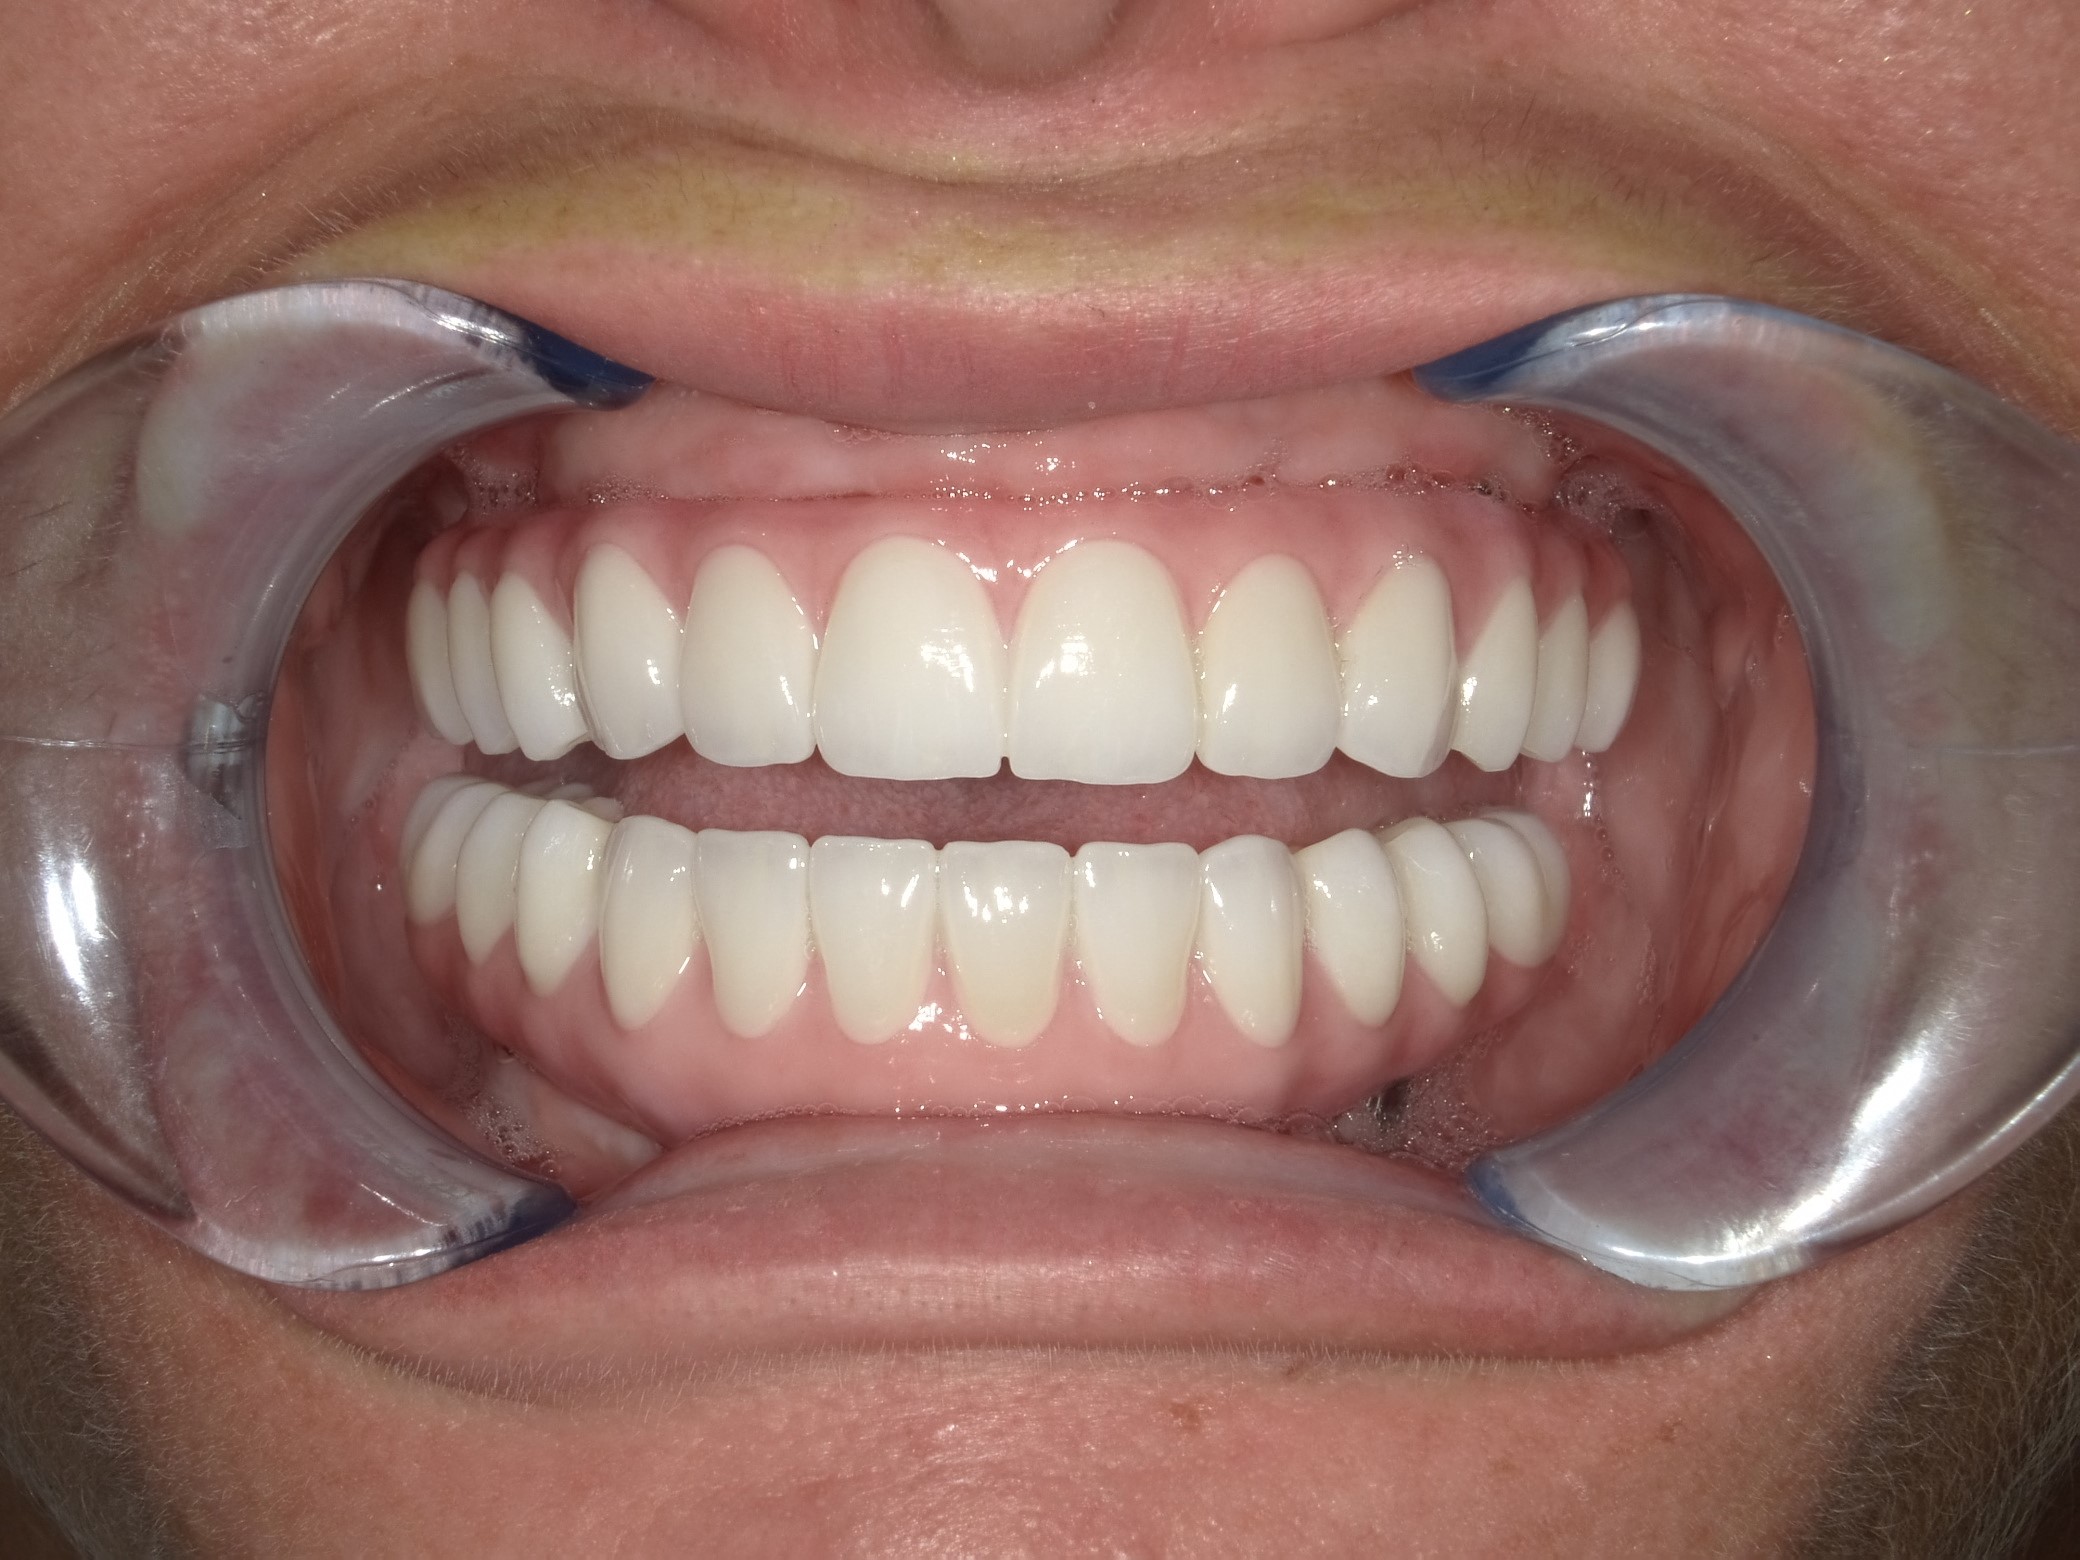 After cosmetic dentist port st lucie dental implants Implant